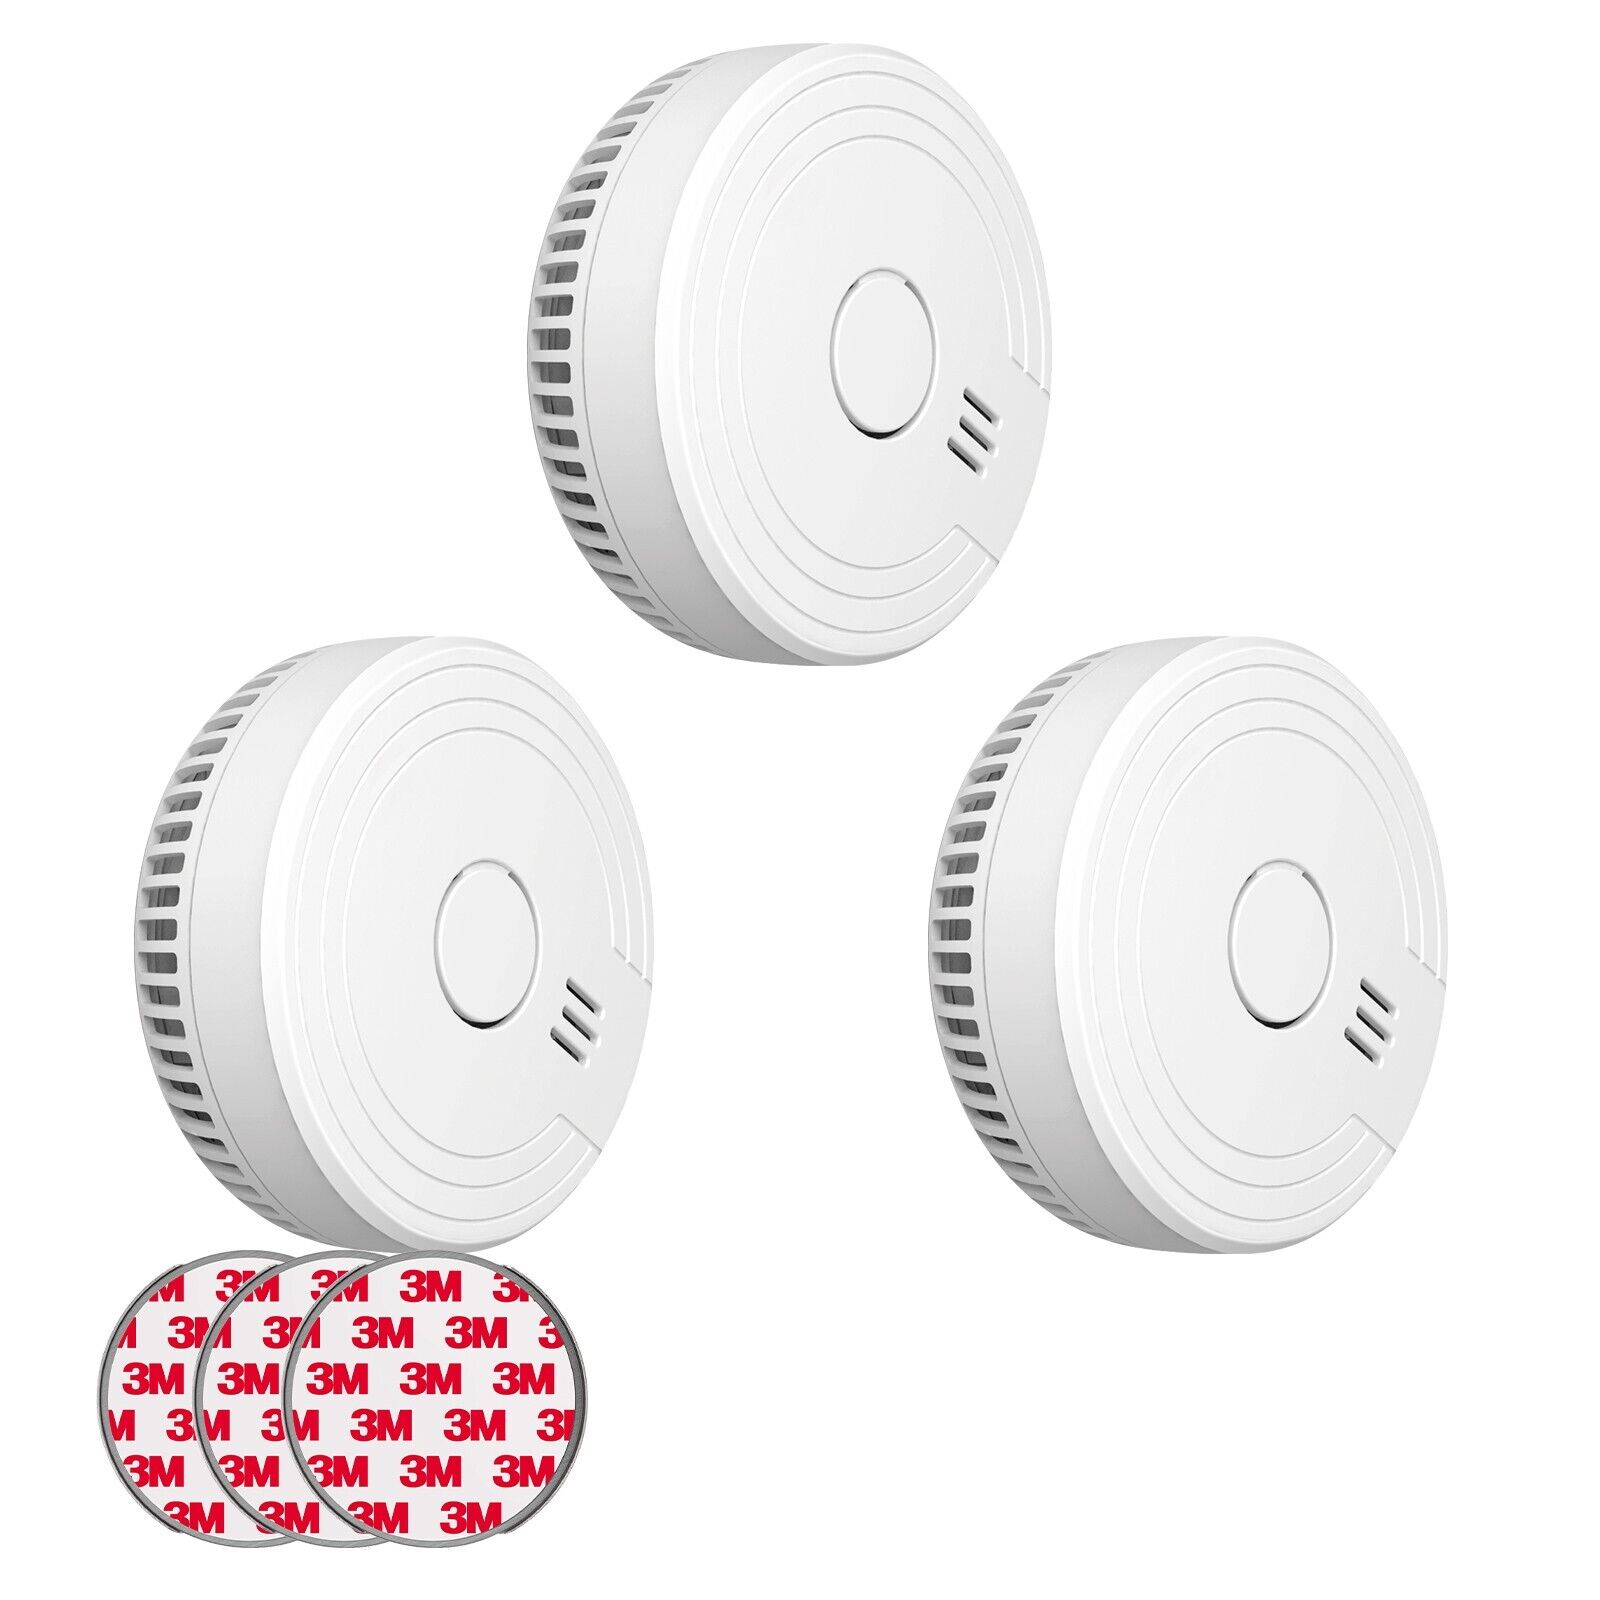 NEW ORIGINAL ECOEY FIRE ALARM SMOKE DETECTOR PHOTOELECTRIC With Batteries 3PCS